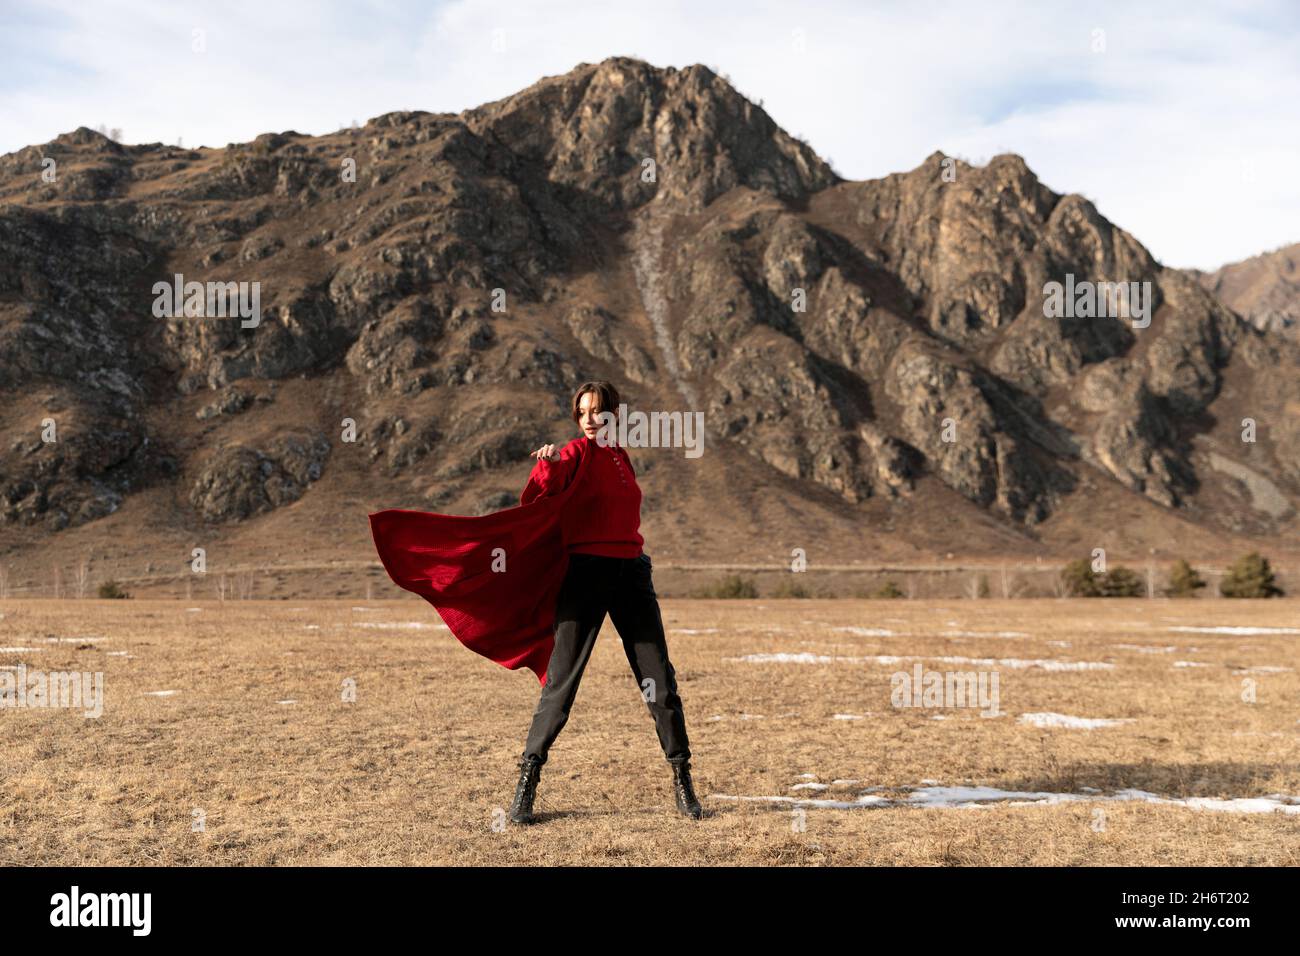 Woman in red coat dancing next to the mountain Stock Photo